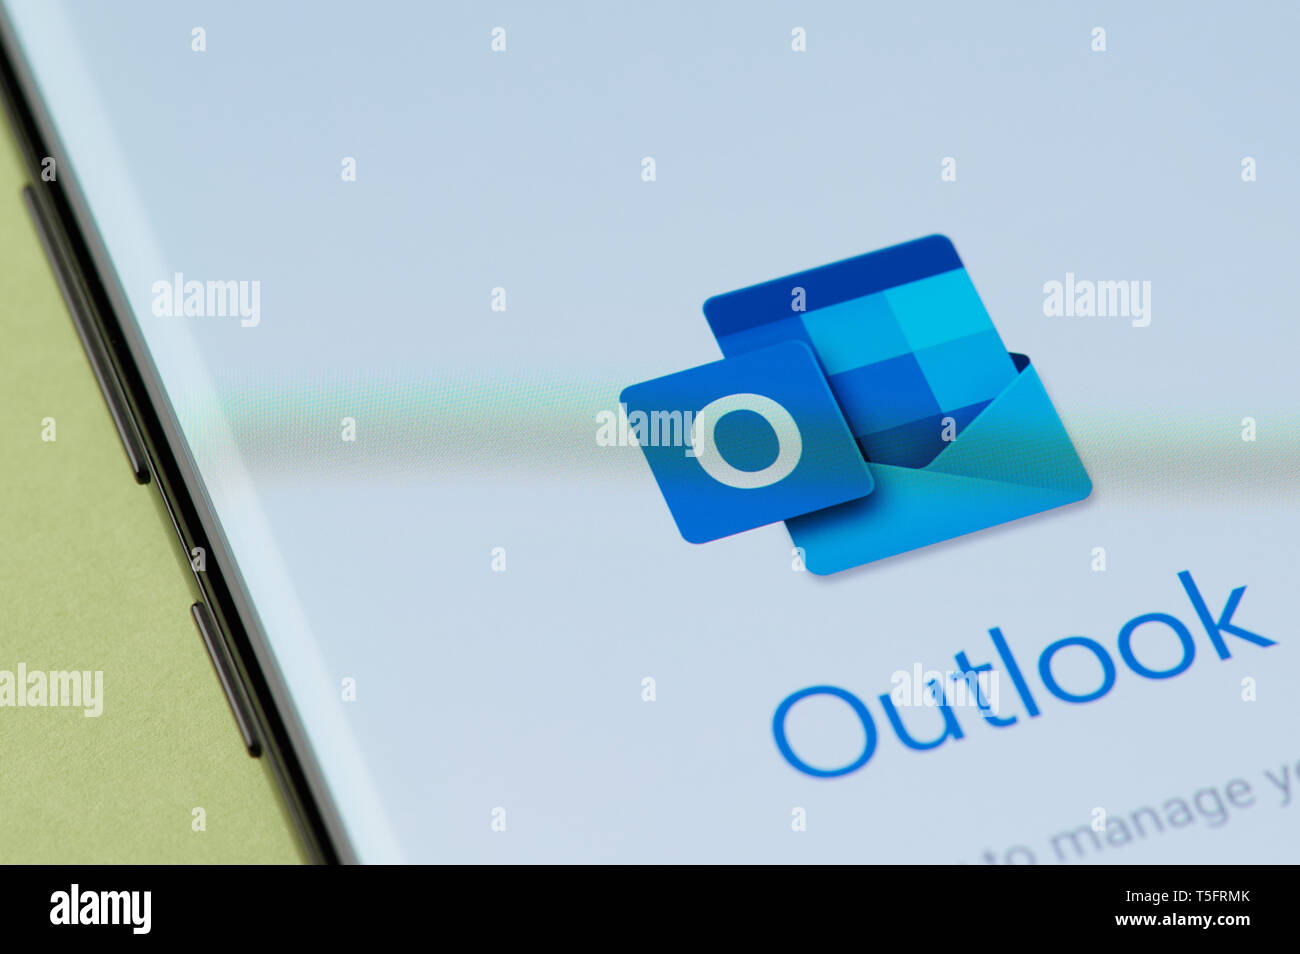 New york, USA - april 22, 2019: Outlook email app interface on smartphone screen Stock Photo